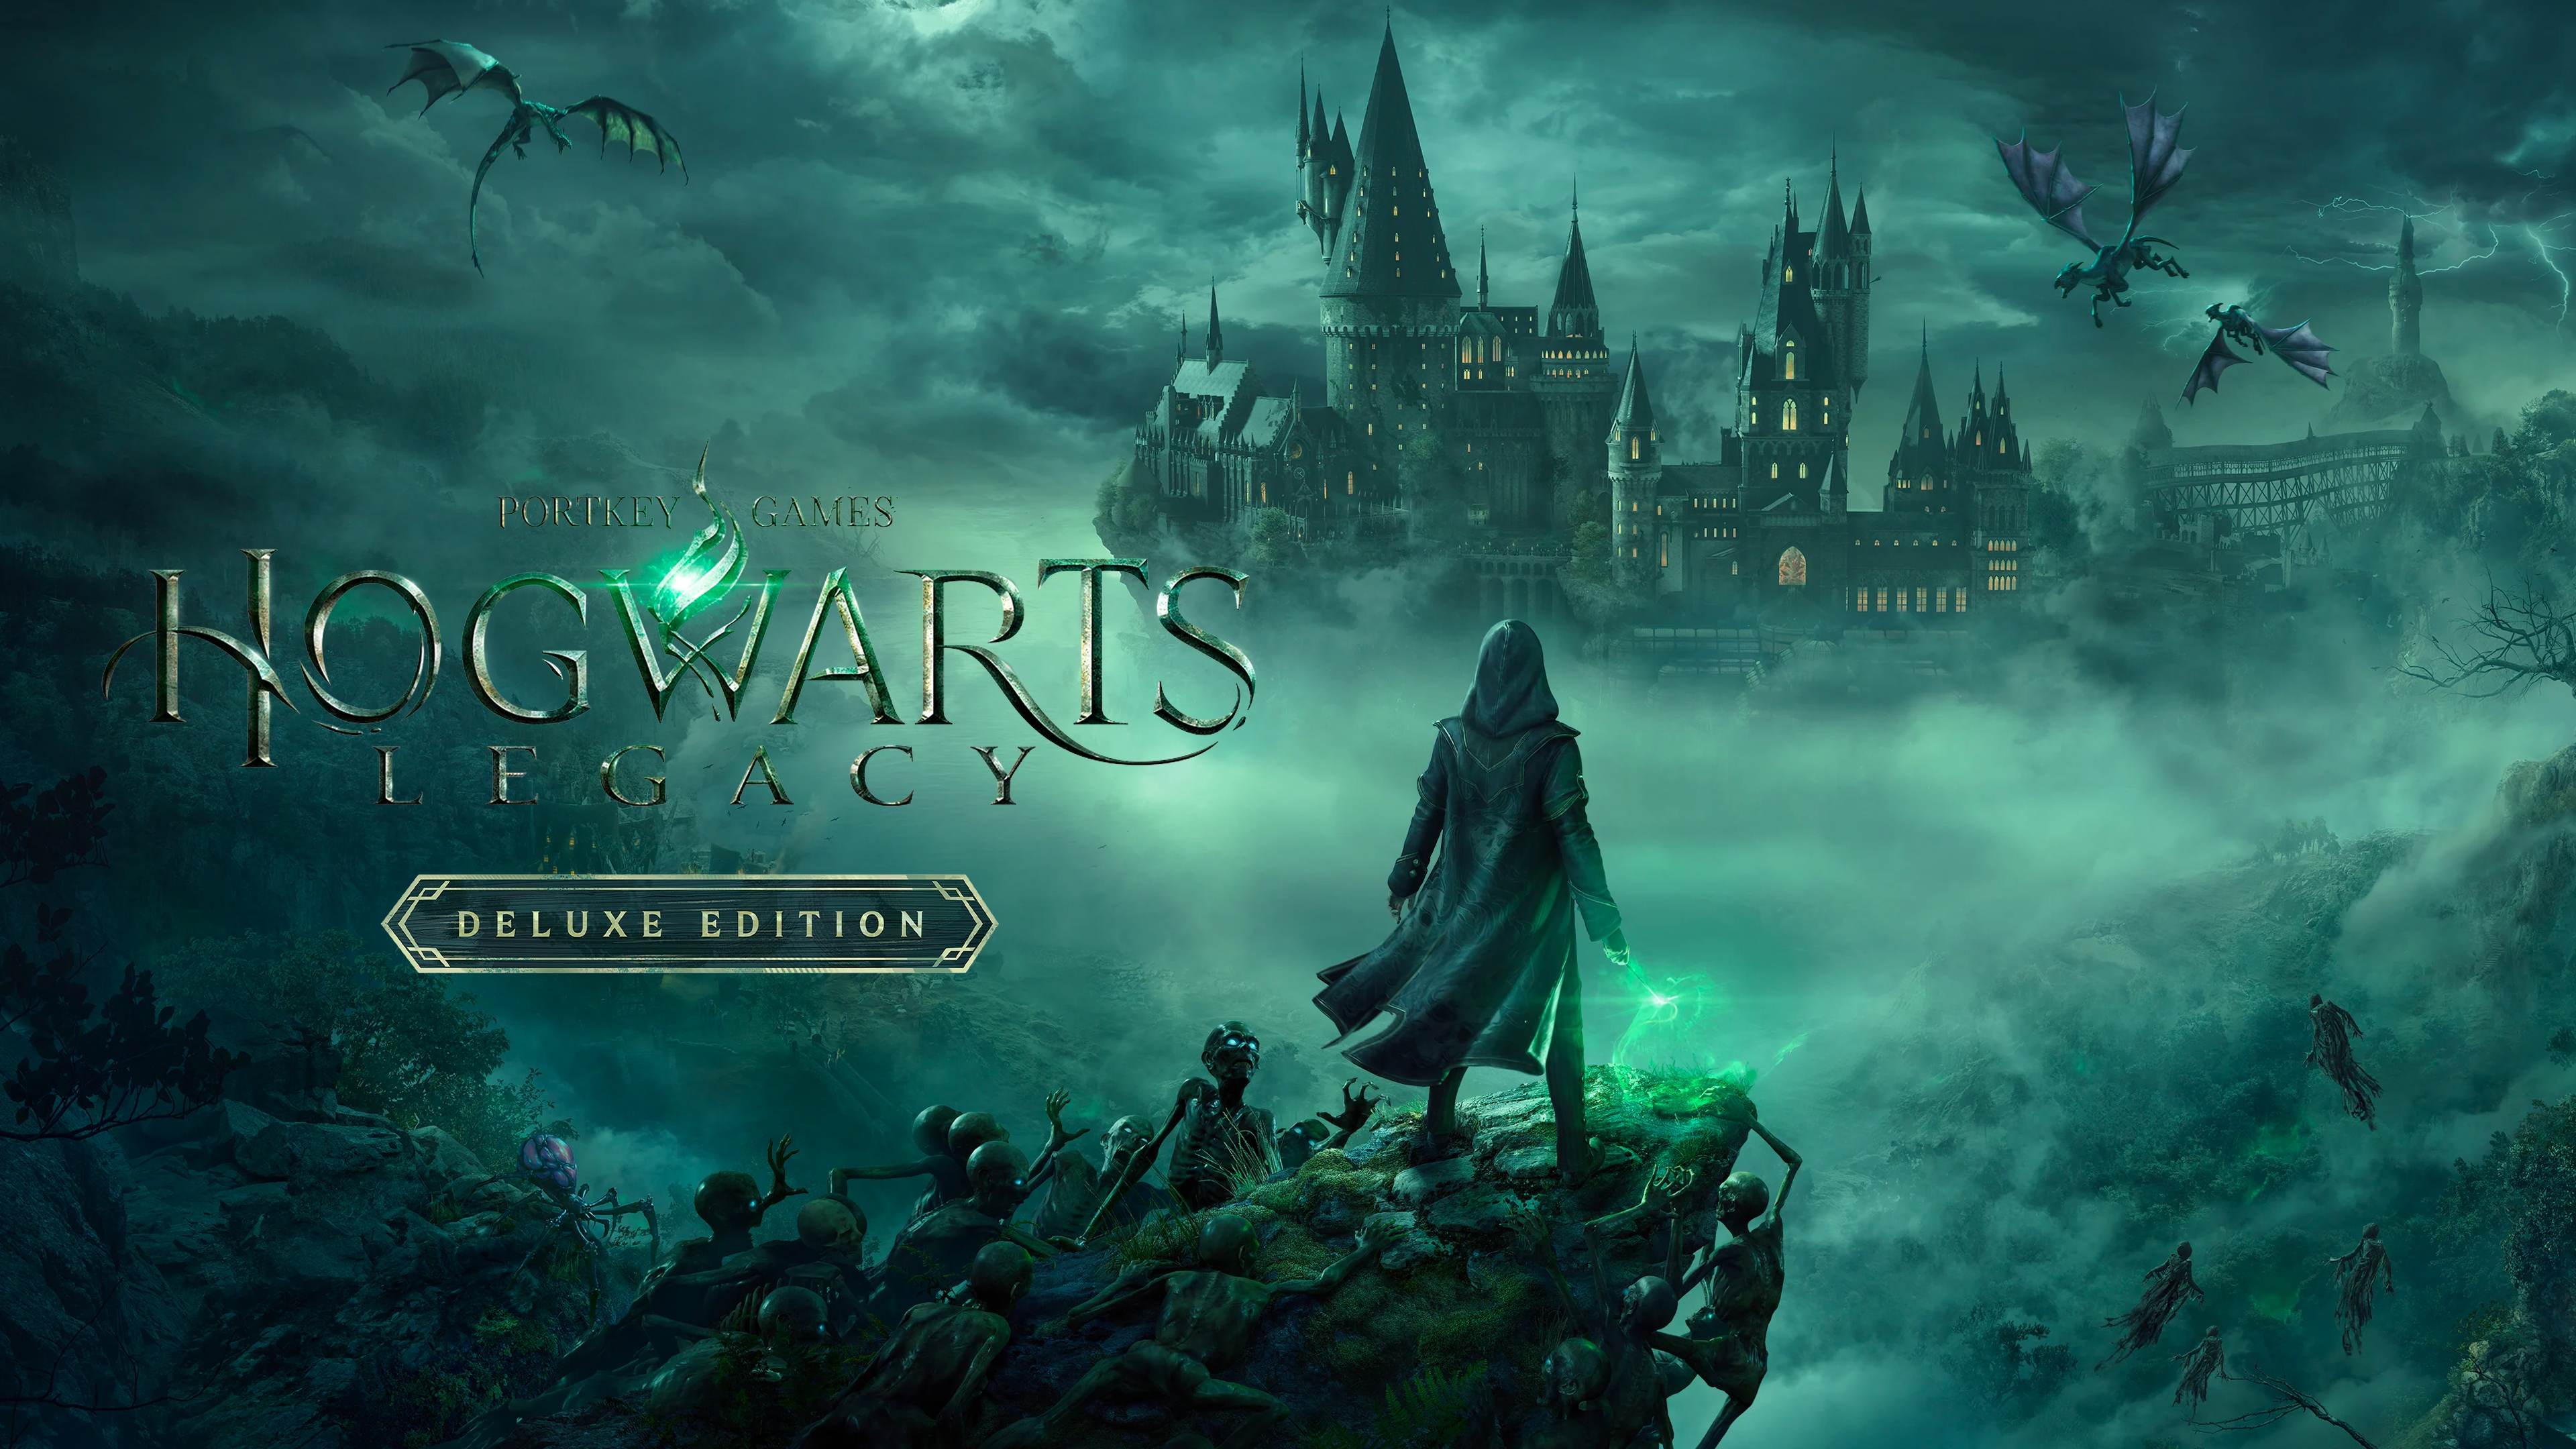 Hogwarts Legacy Deluxe Edition is available to buy on Steam